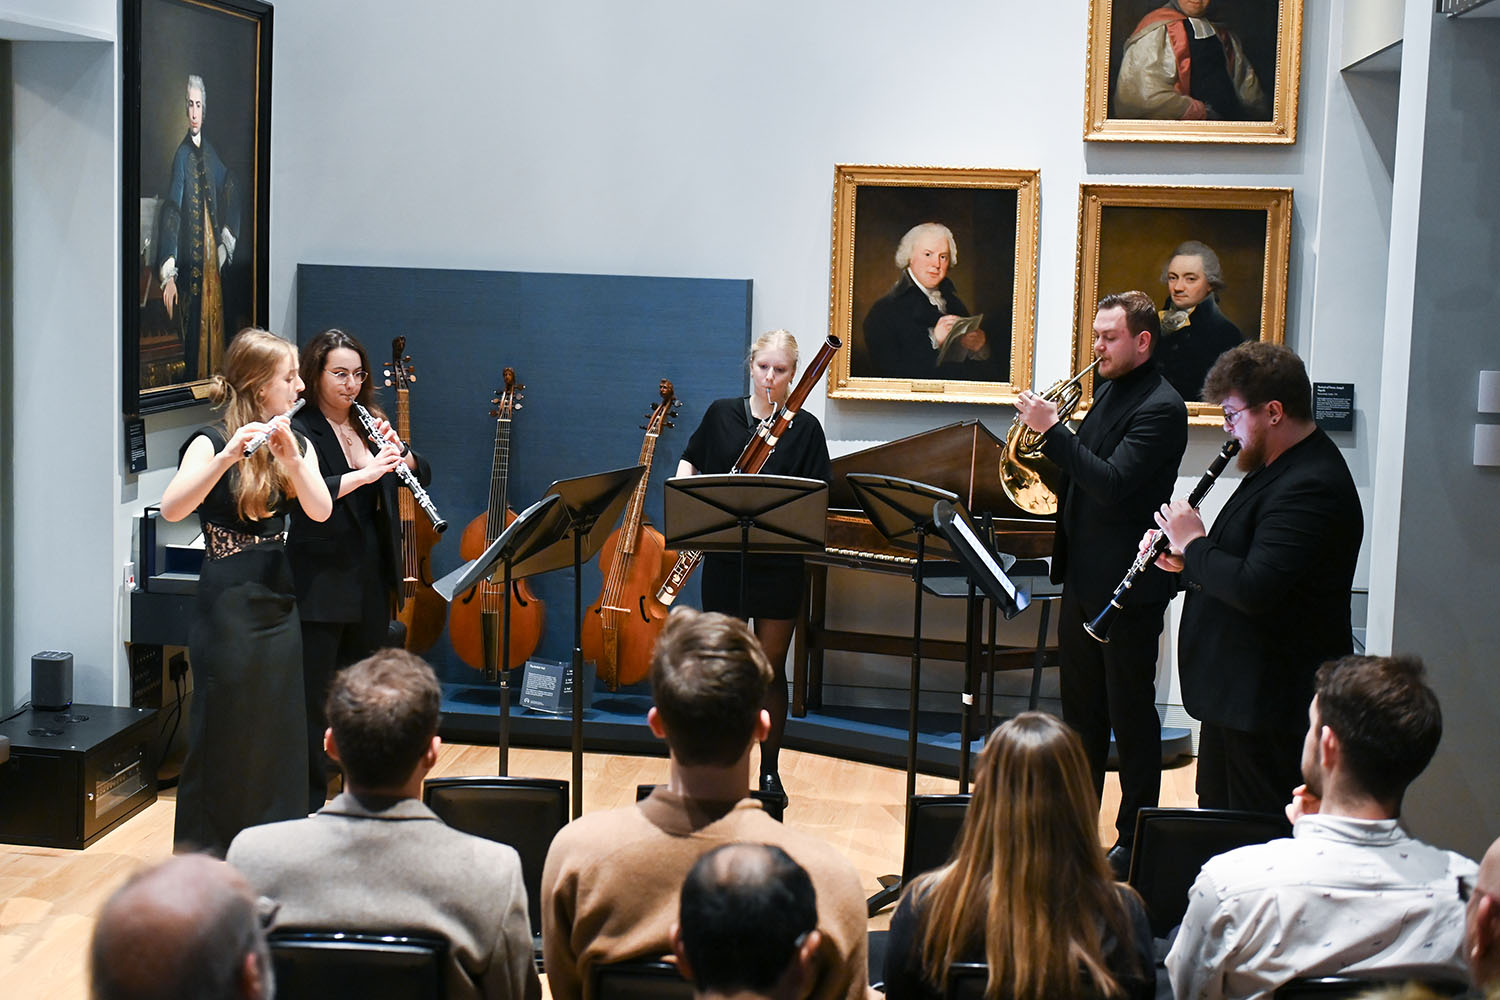 A woodwind chamber group performing in the RCM Museum